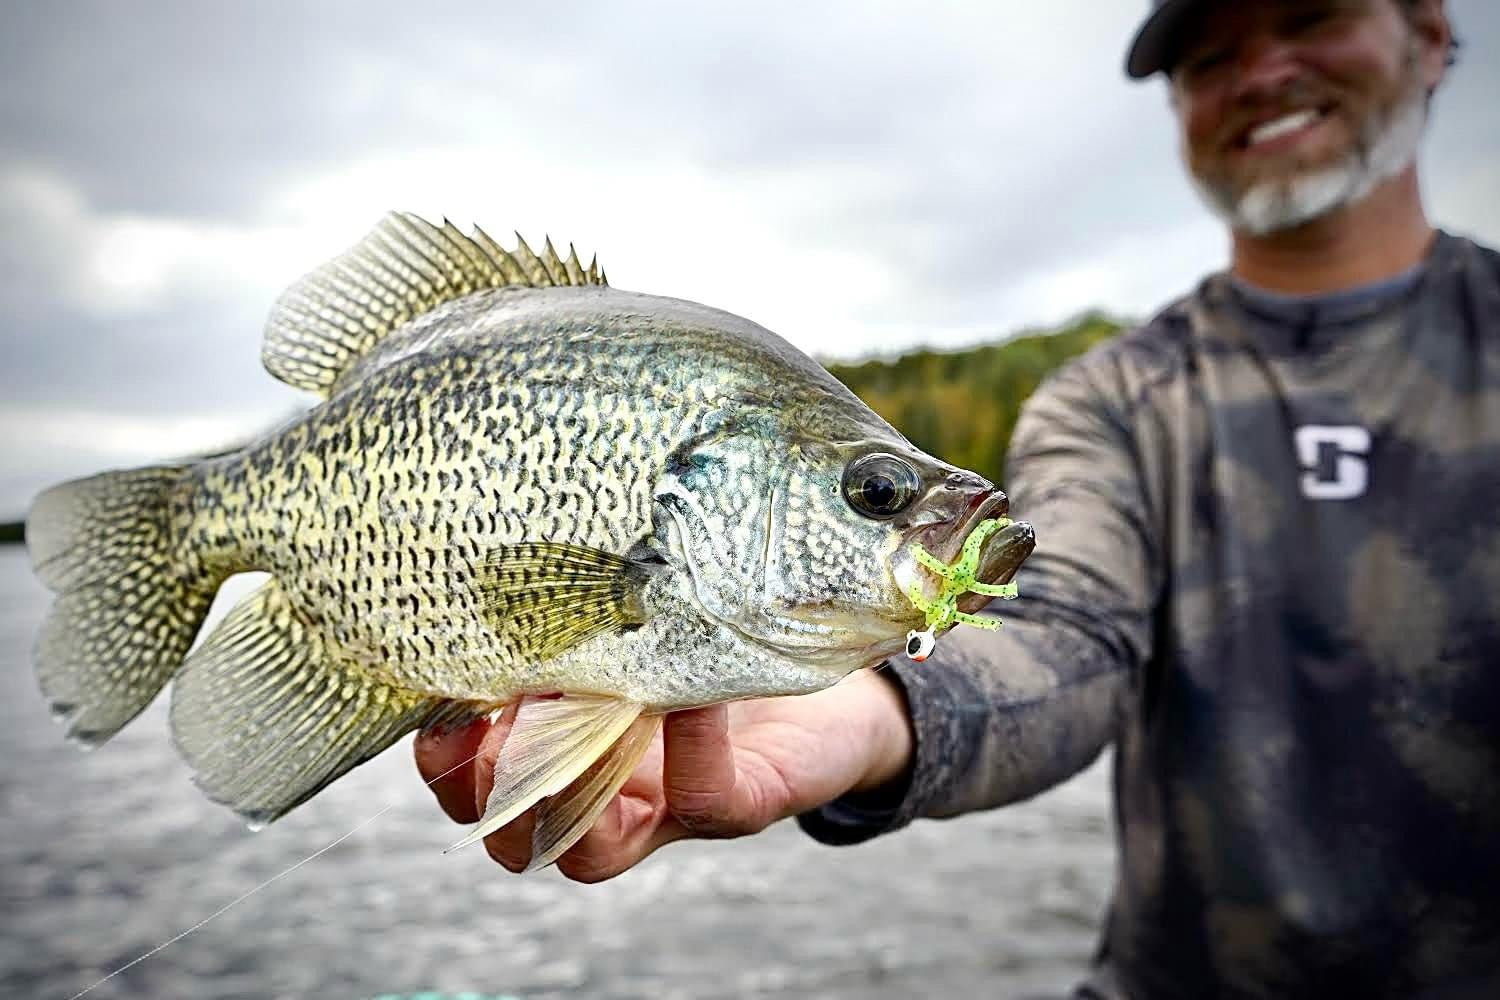 Trophy Crappie caught on the Hornet soft plastic